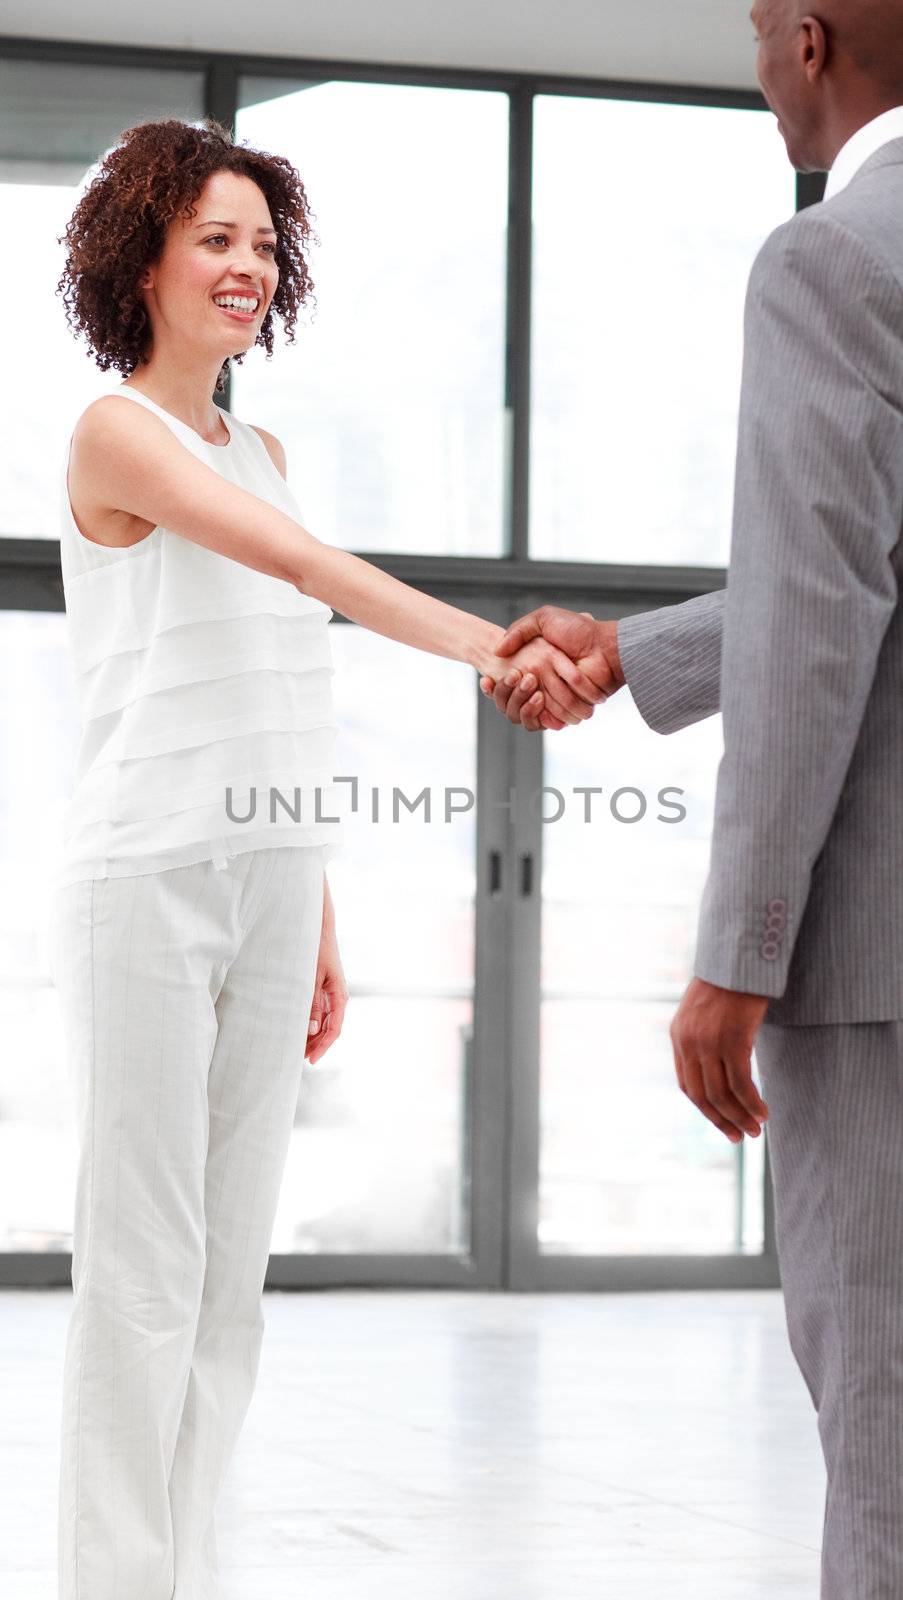 Business people shaking hands in agreement by Wavebreakmedia